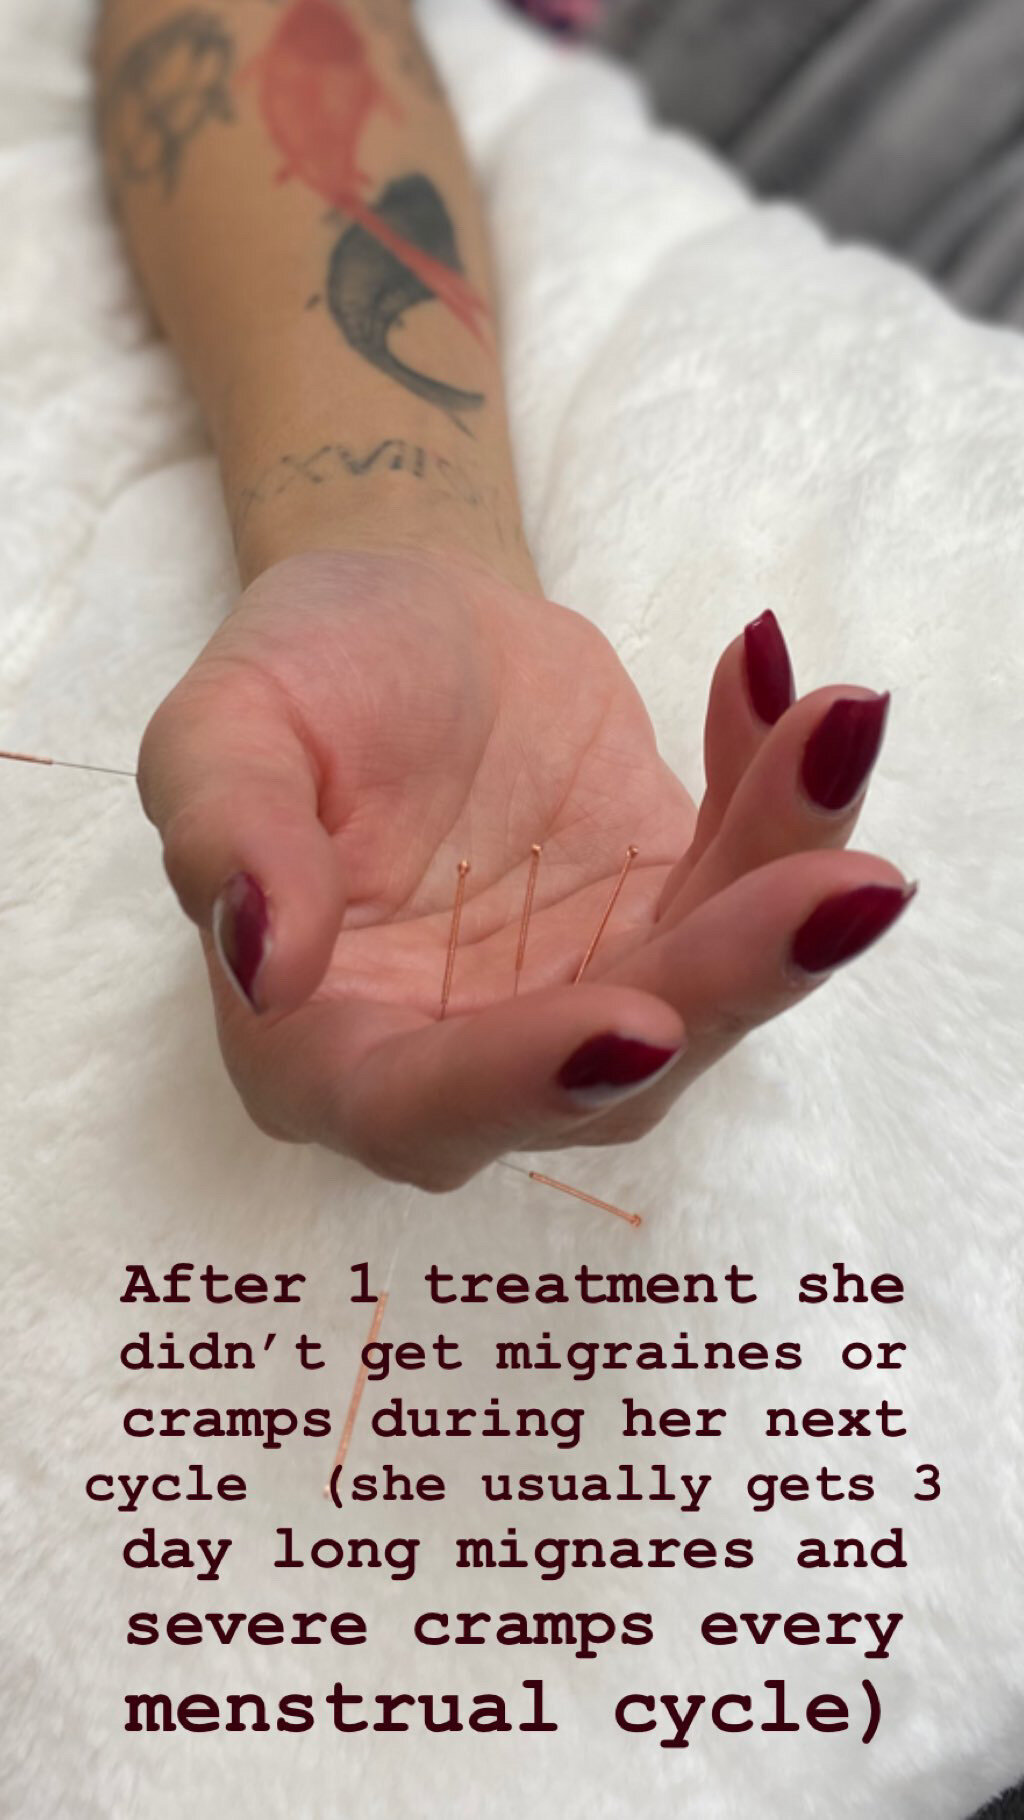  SuJok acupuncture in Vancouver used to treat reproductive system conditions and issues. Patient received treatment for severe menstrual side effects such as chronic migraines.  